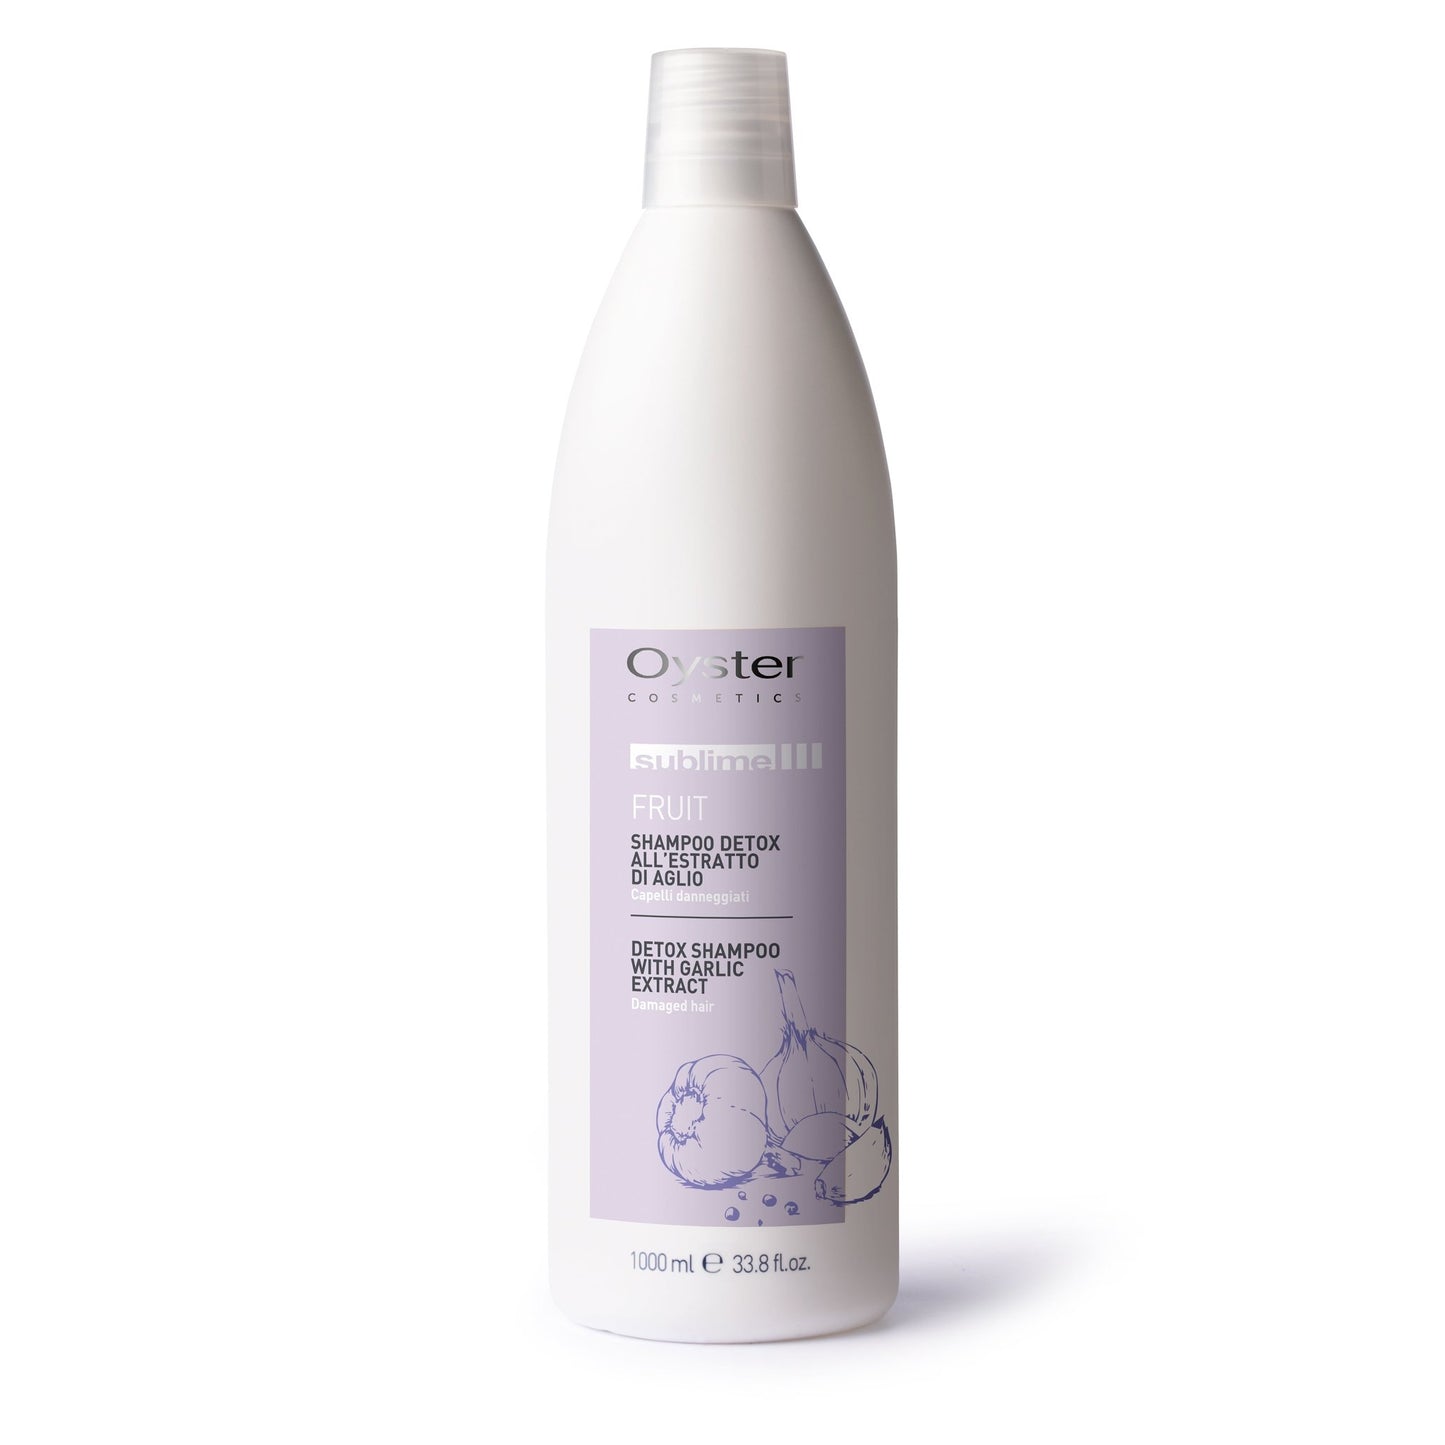 Detox Shampoo with Garlic Extract | Sublime Fruit | OYSTER - SH Salons